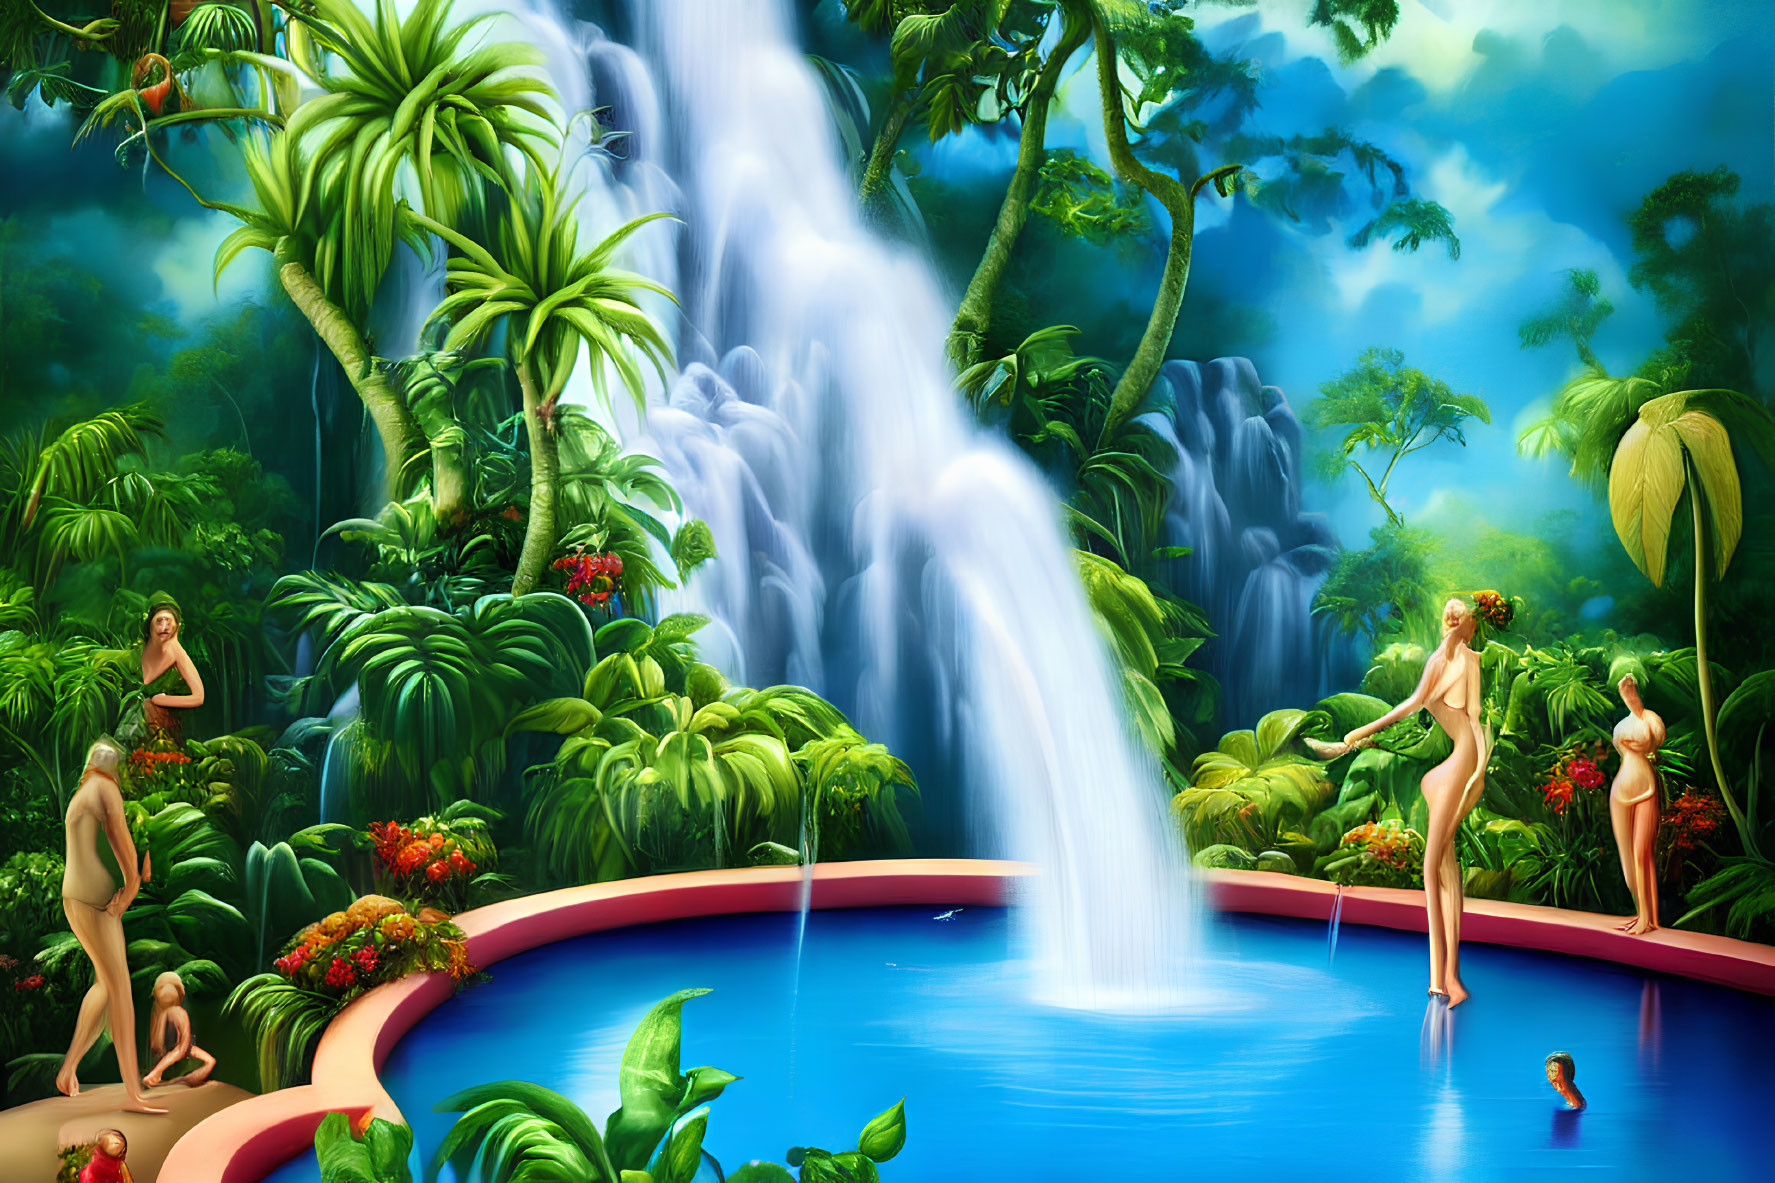 Colorful jungle scene with waterfall, exotic plants, and human-like characters interacting harmoniously